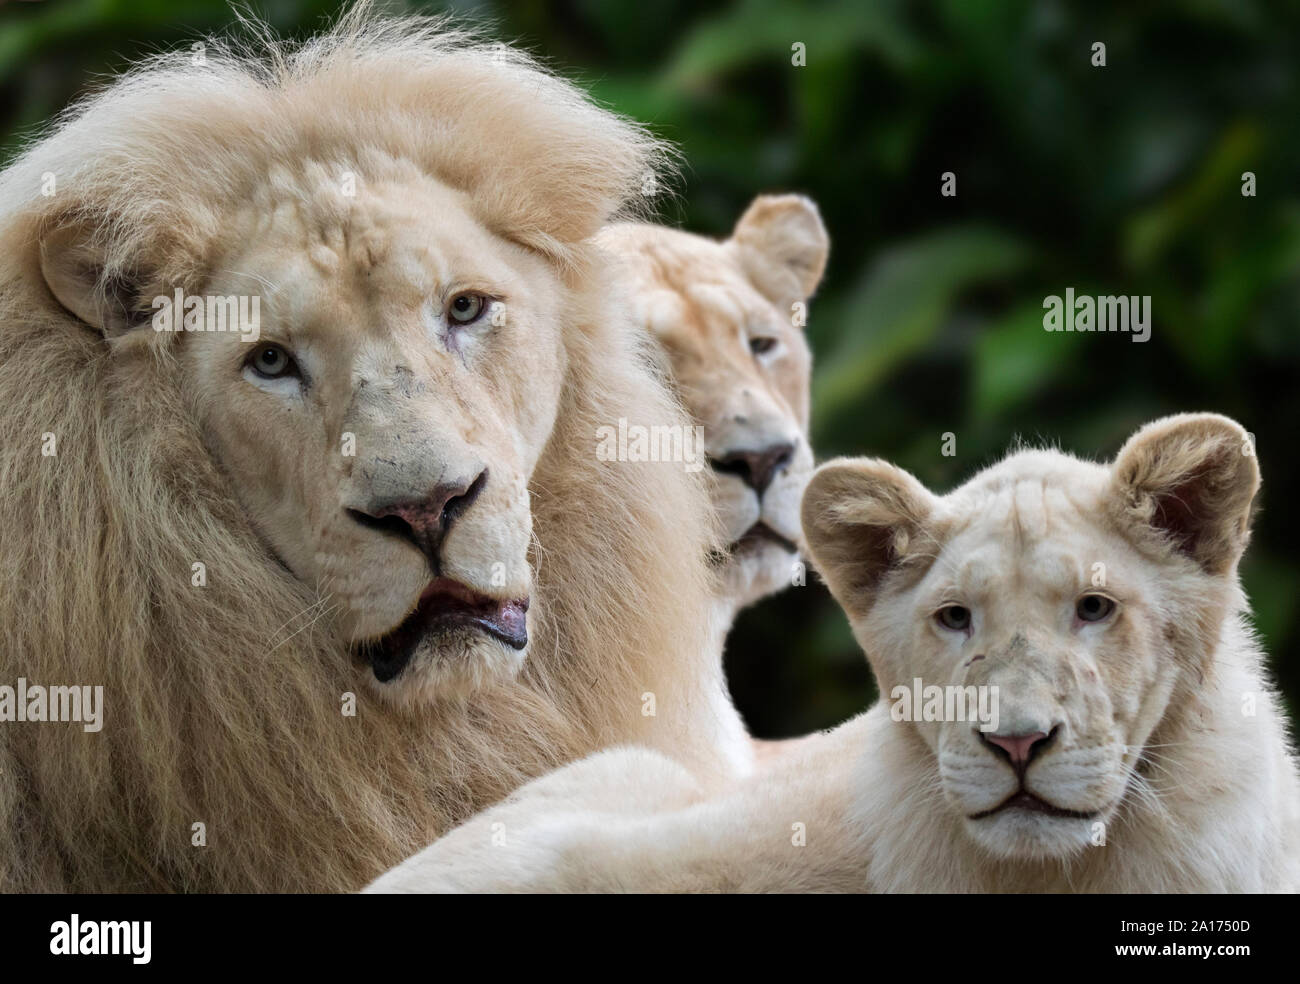 Male, female and young leucistic white lions (Panthera leo krugeri) rare morph with genetic condition called leucism caused by double recessive allele Stock Photo